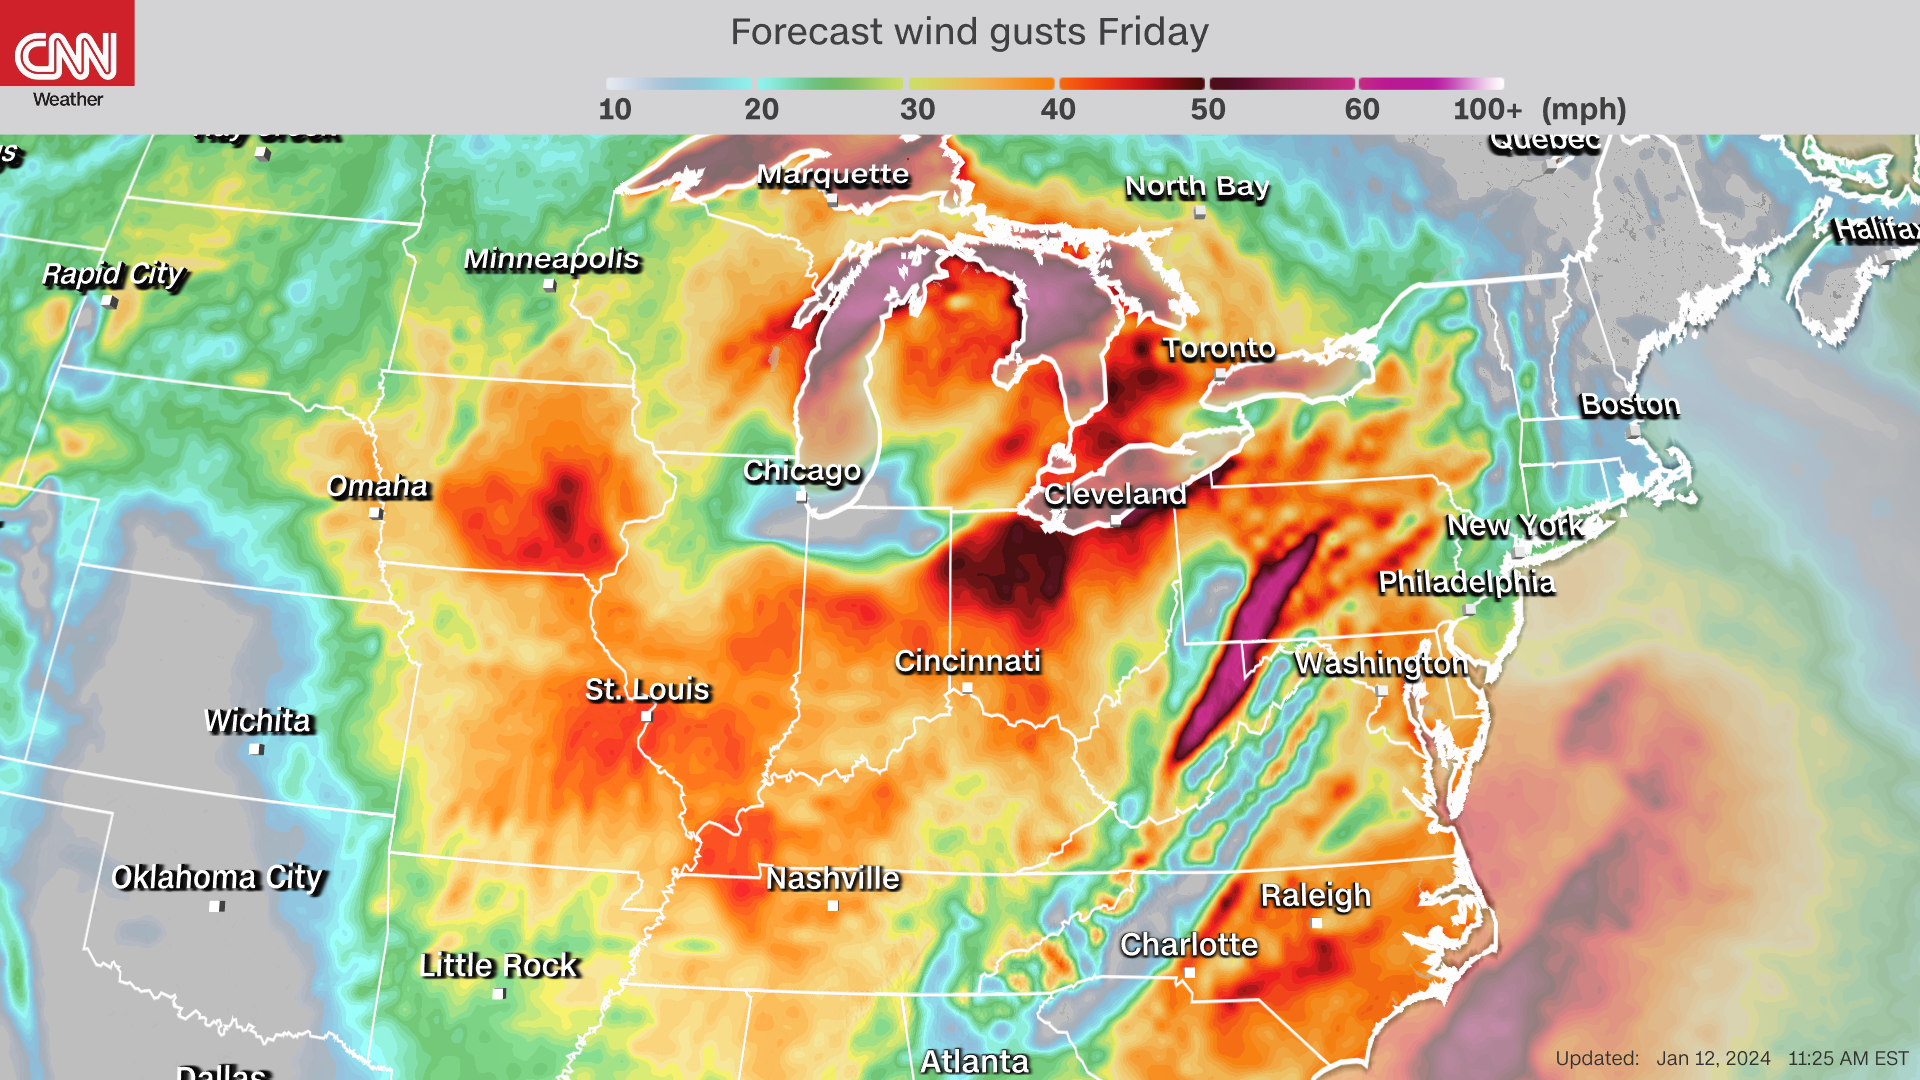 Wind gust forecast for Friday evening.